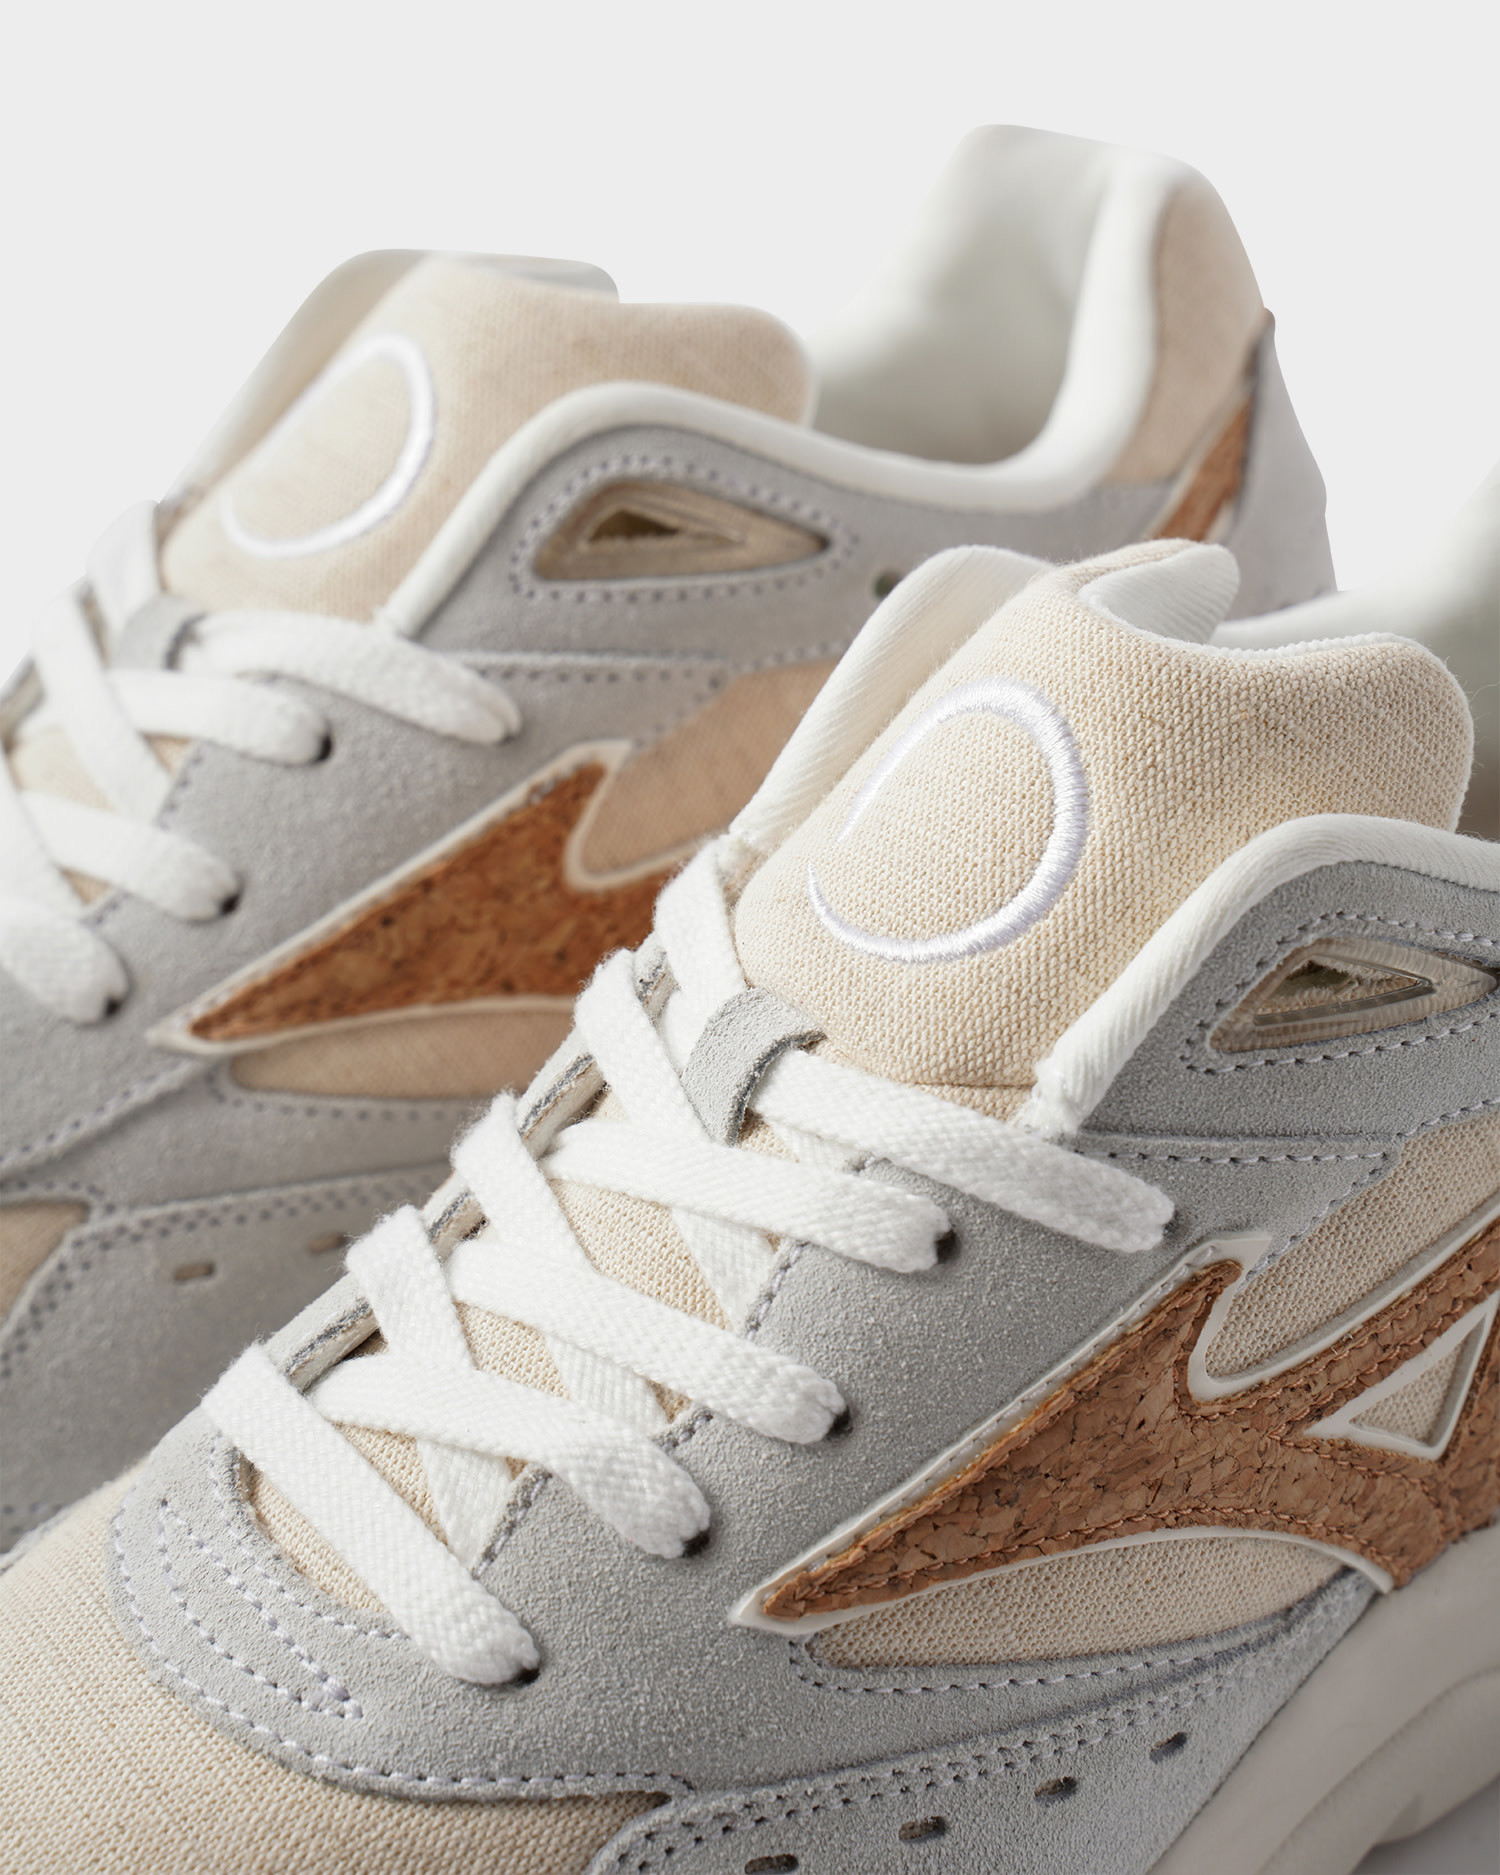 Mizuno Contender Undyed white/ Ginger Root/ Undyed Root